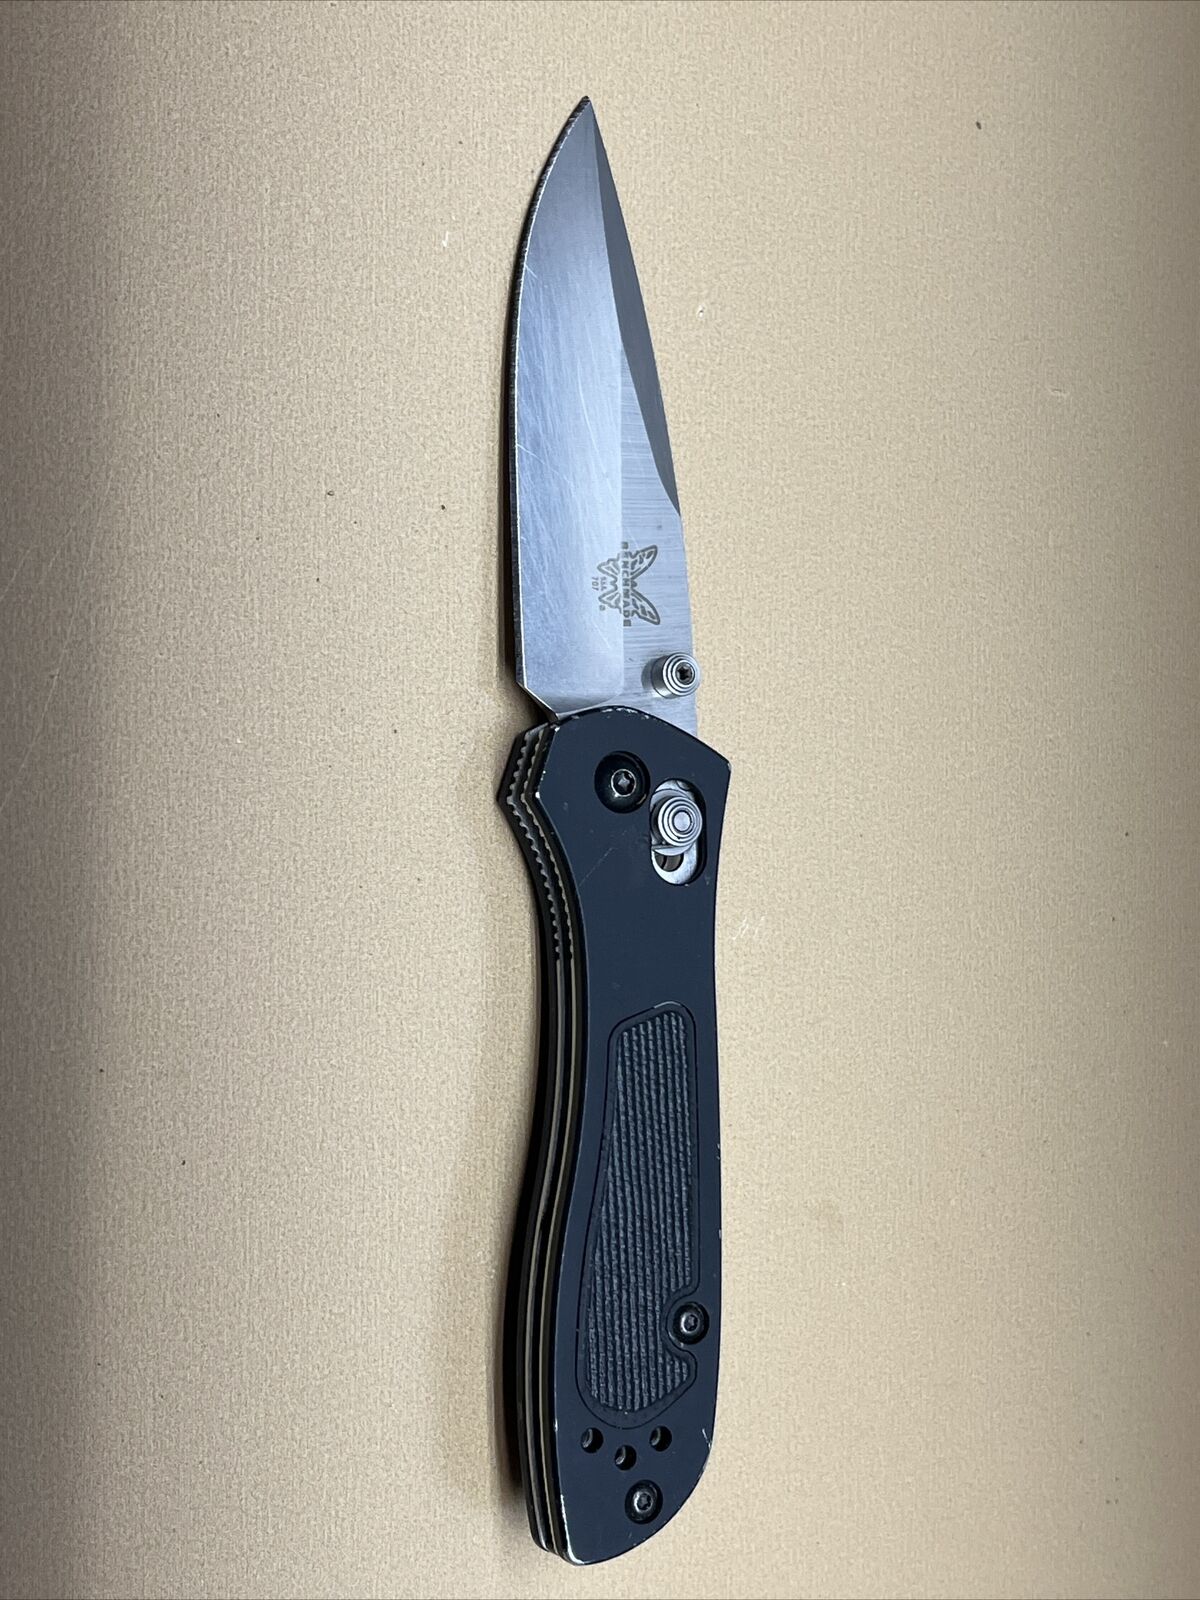 Benchmade 707 Sequel McHenry & Williams Folding Knife, Discontinued 